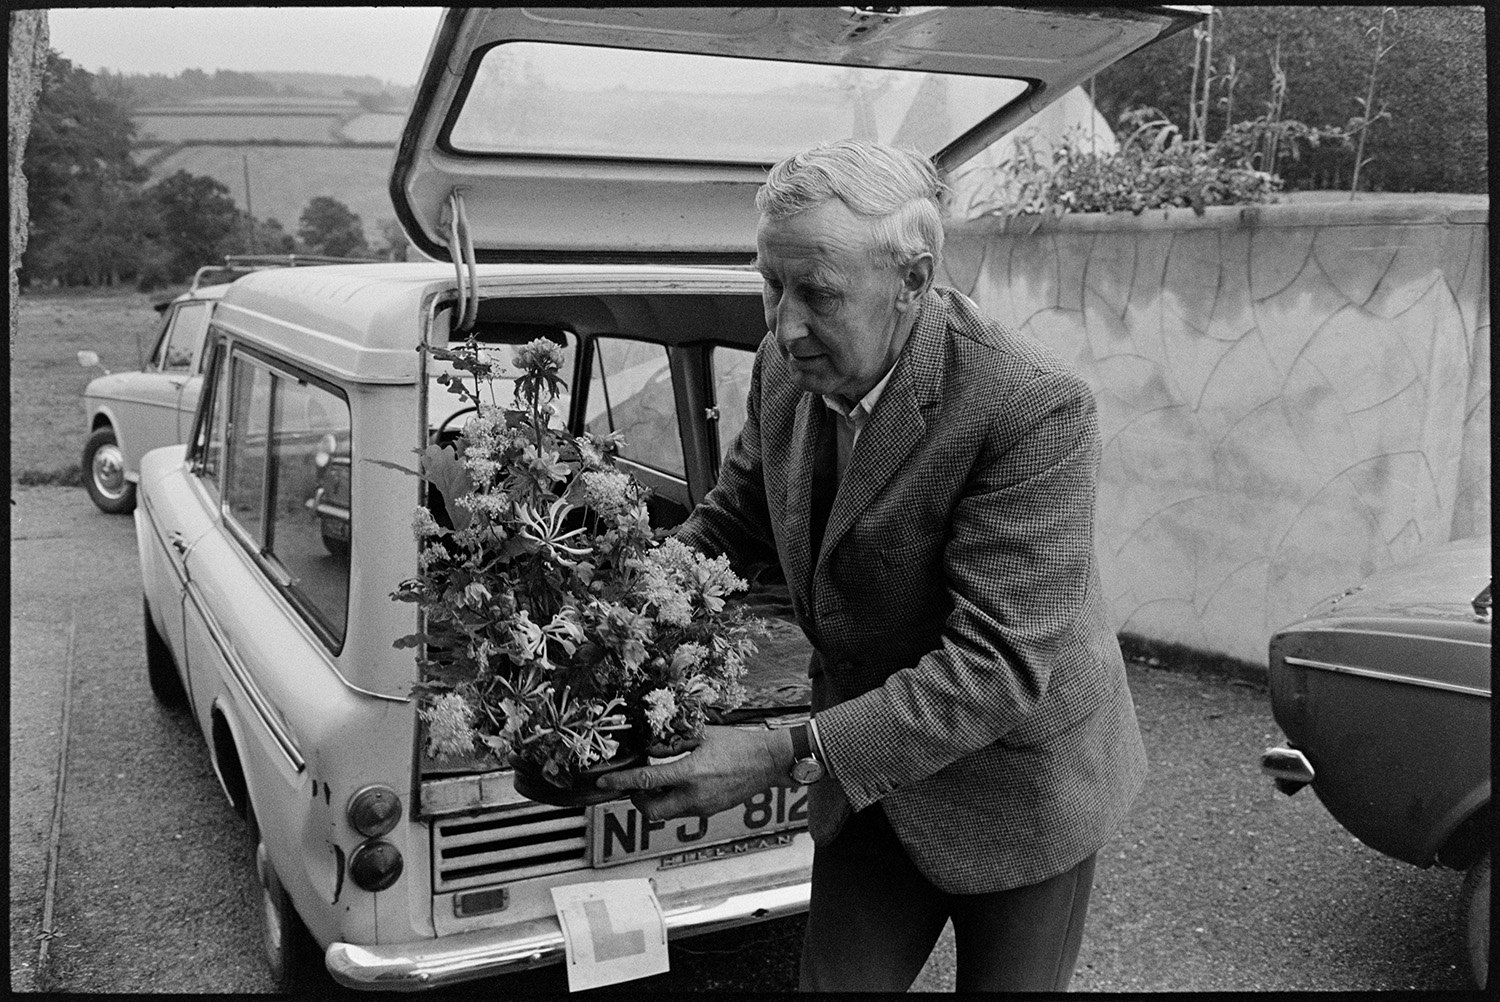 People bringing in entries for flower show and arranging them in village hall. 
[A man unloading a flower arrangement from a car and taking it into Dolton Village Hall for Dolton Flower Show.]